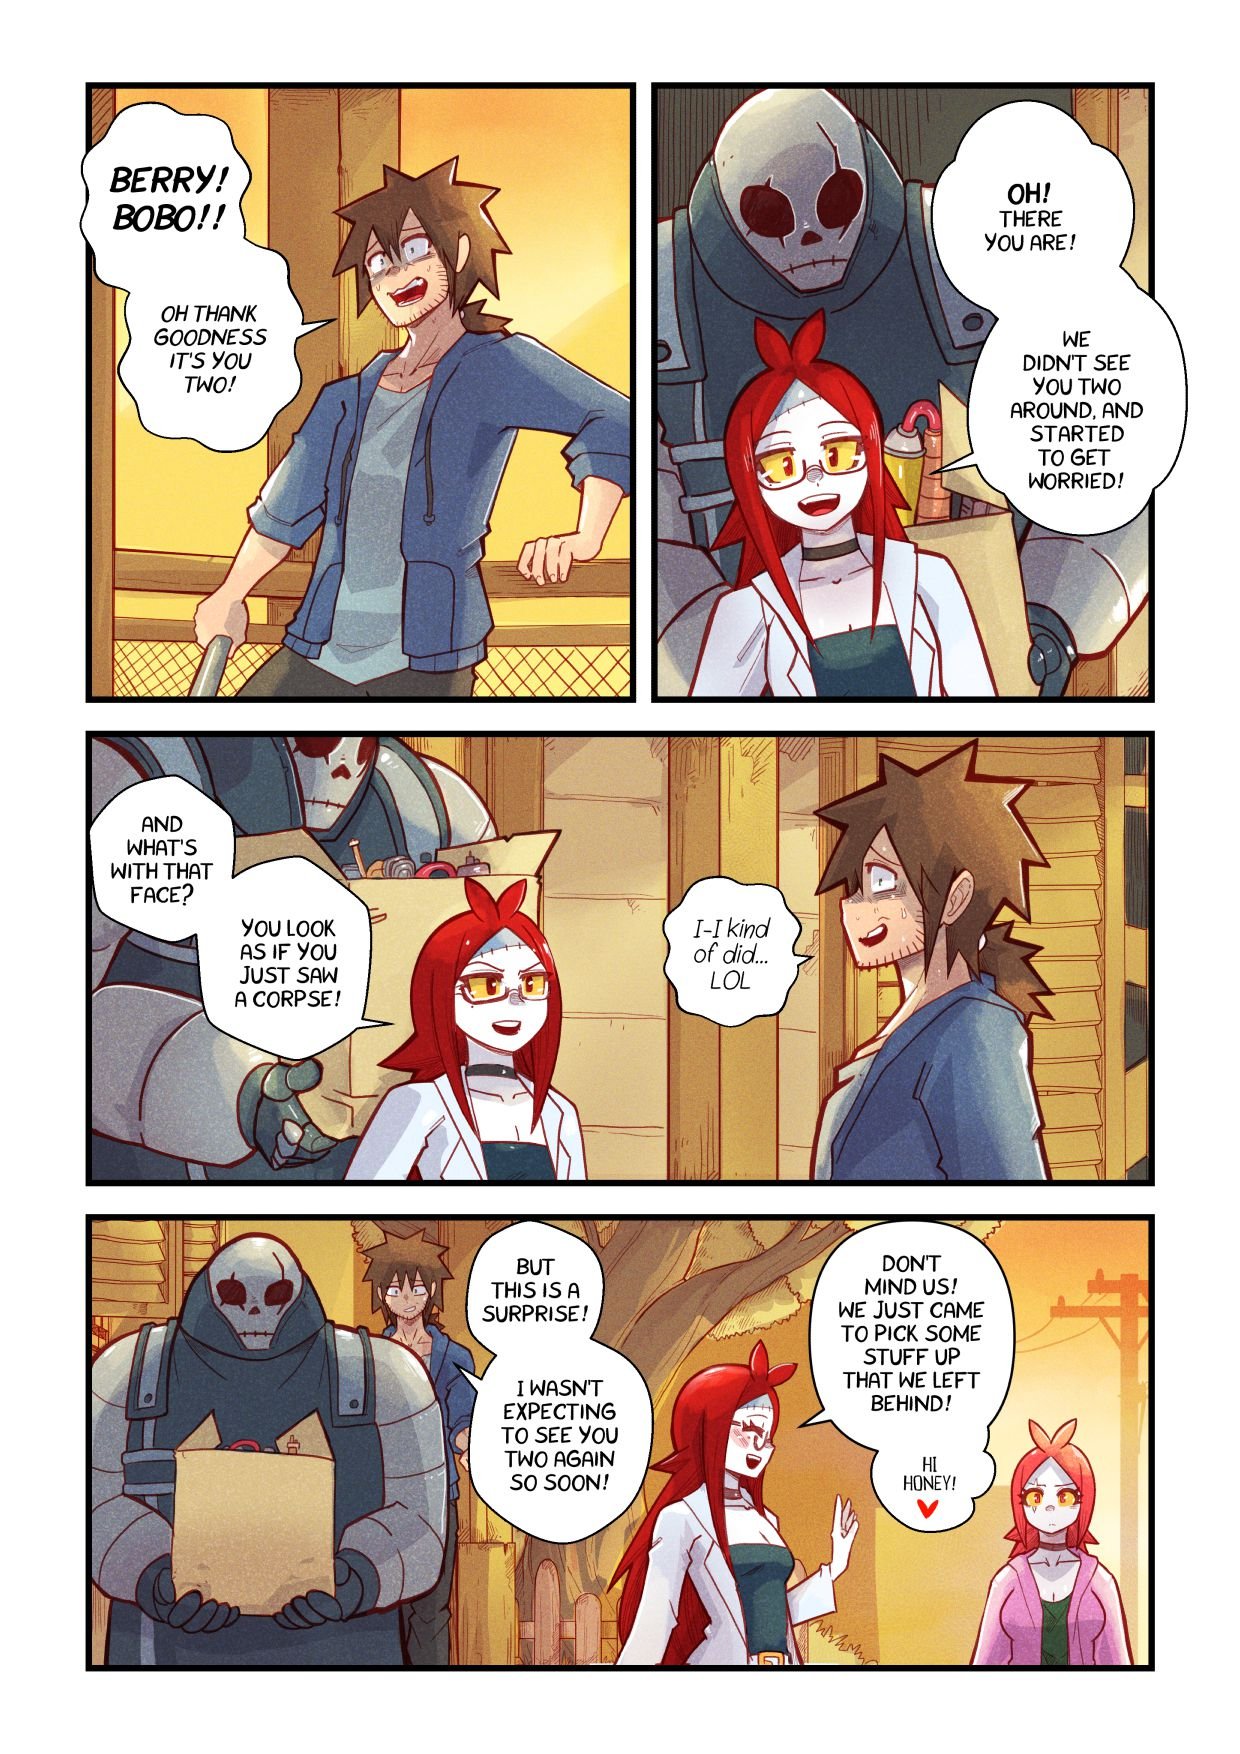 1240px x 1754px - Cherry Road [Mr.E] - 8 . Cherry Road - The Zombie That I Fell For - Chapter  8 [Mr.E] - AllPornComic